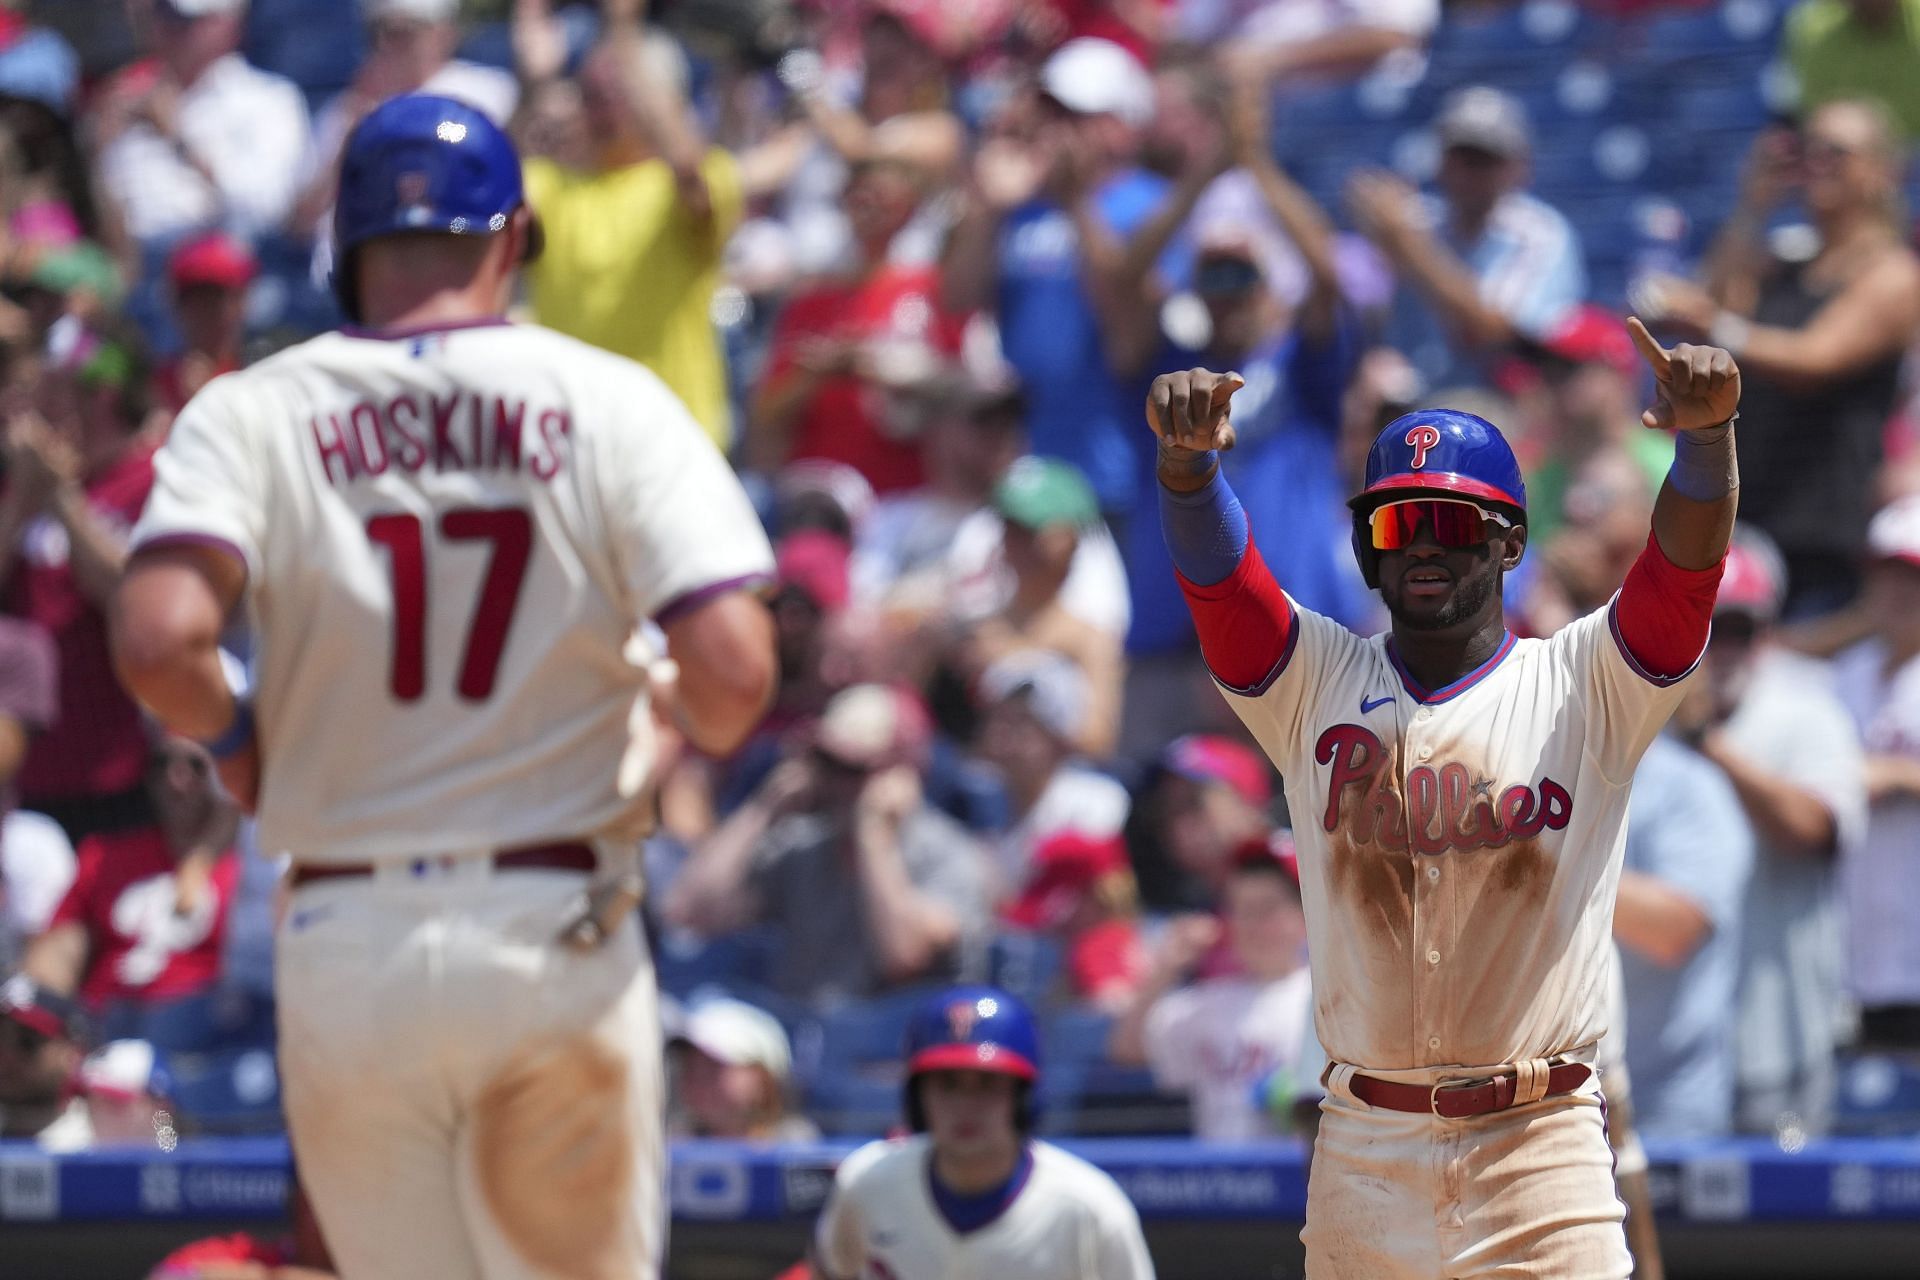 Rhys Hoskins and Odubel Herrera celebrate after a two-run home run during a Atlanta Braves v Philadelphia Phillies game.